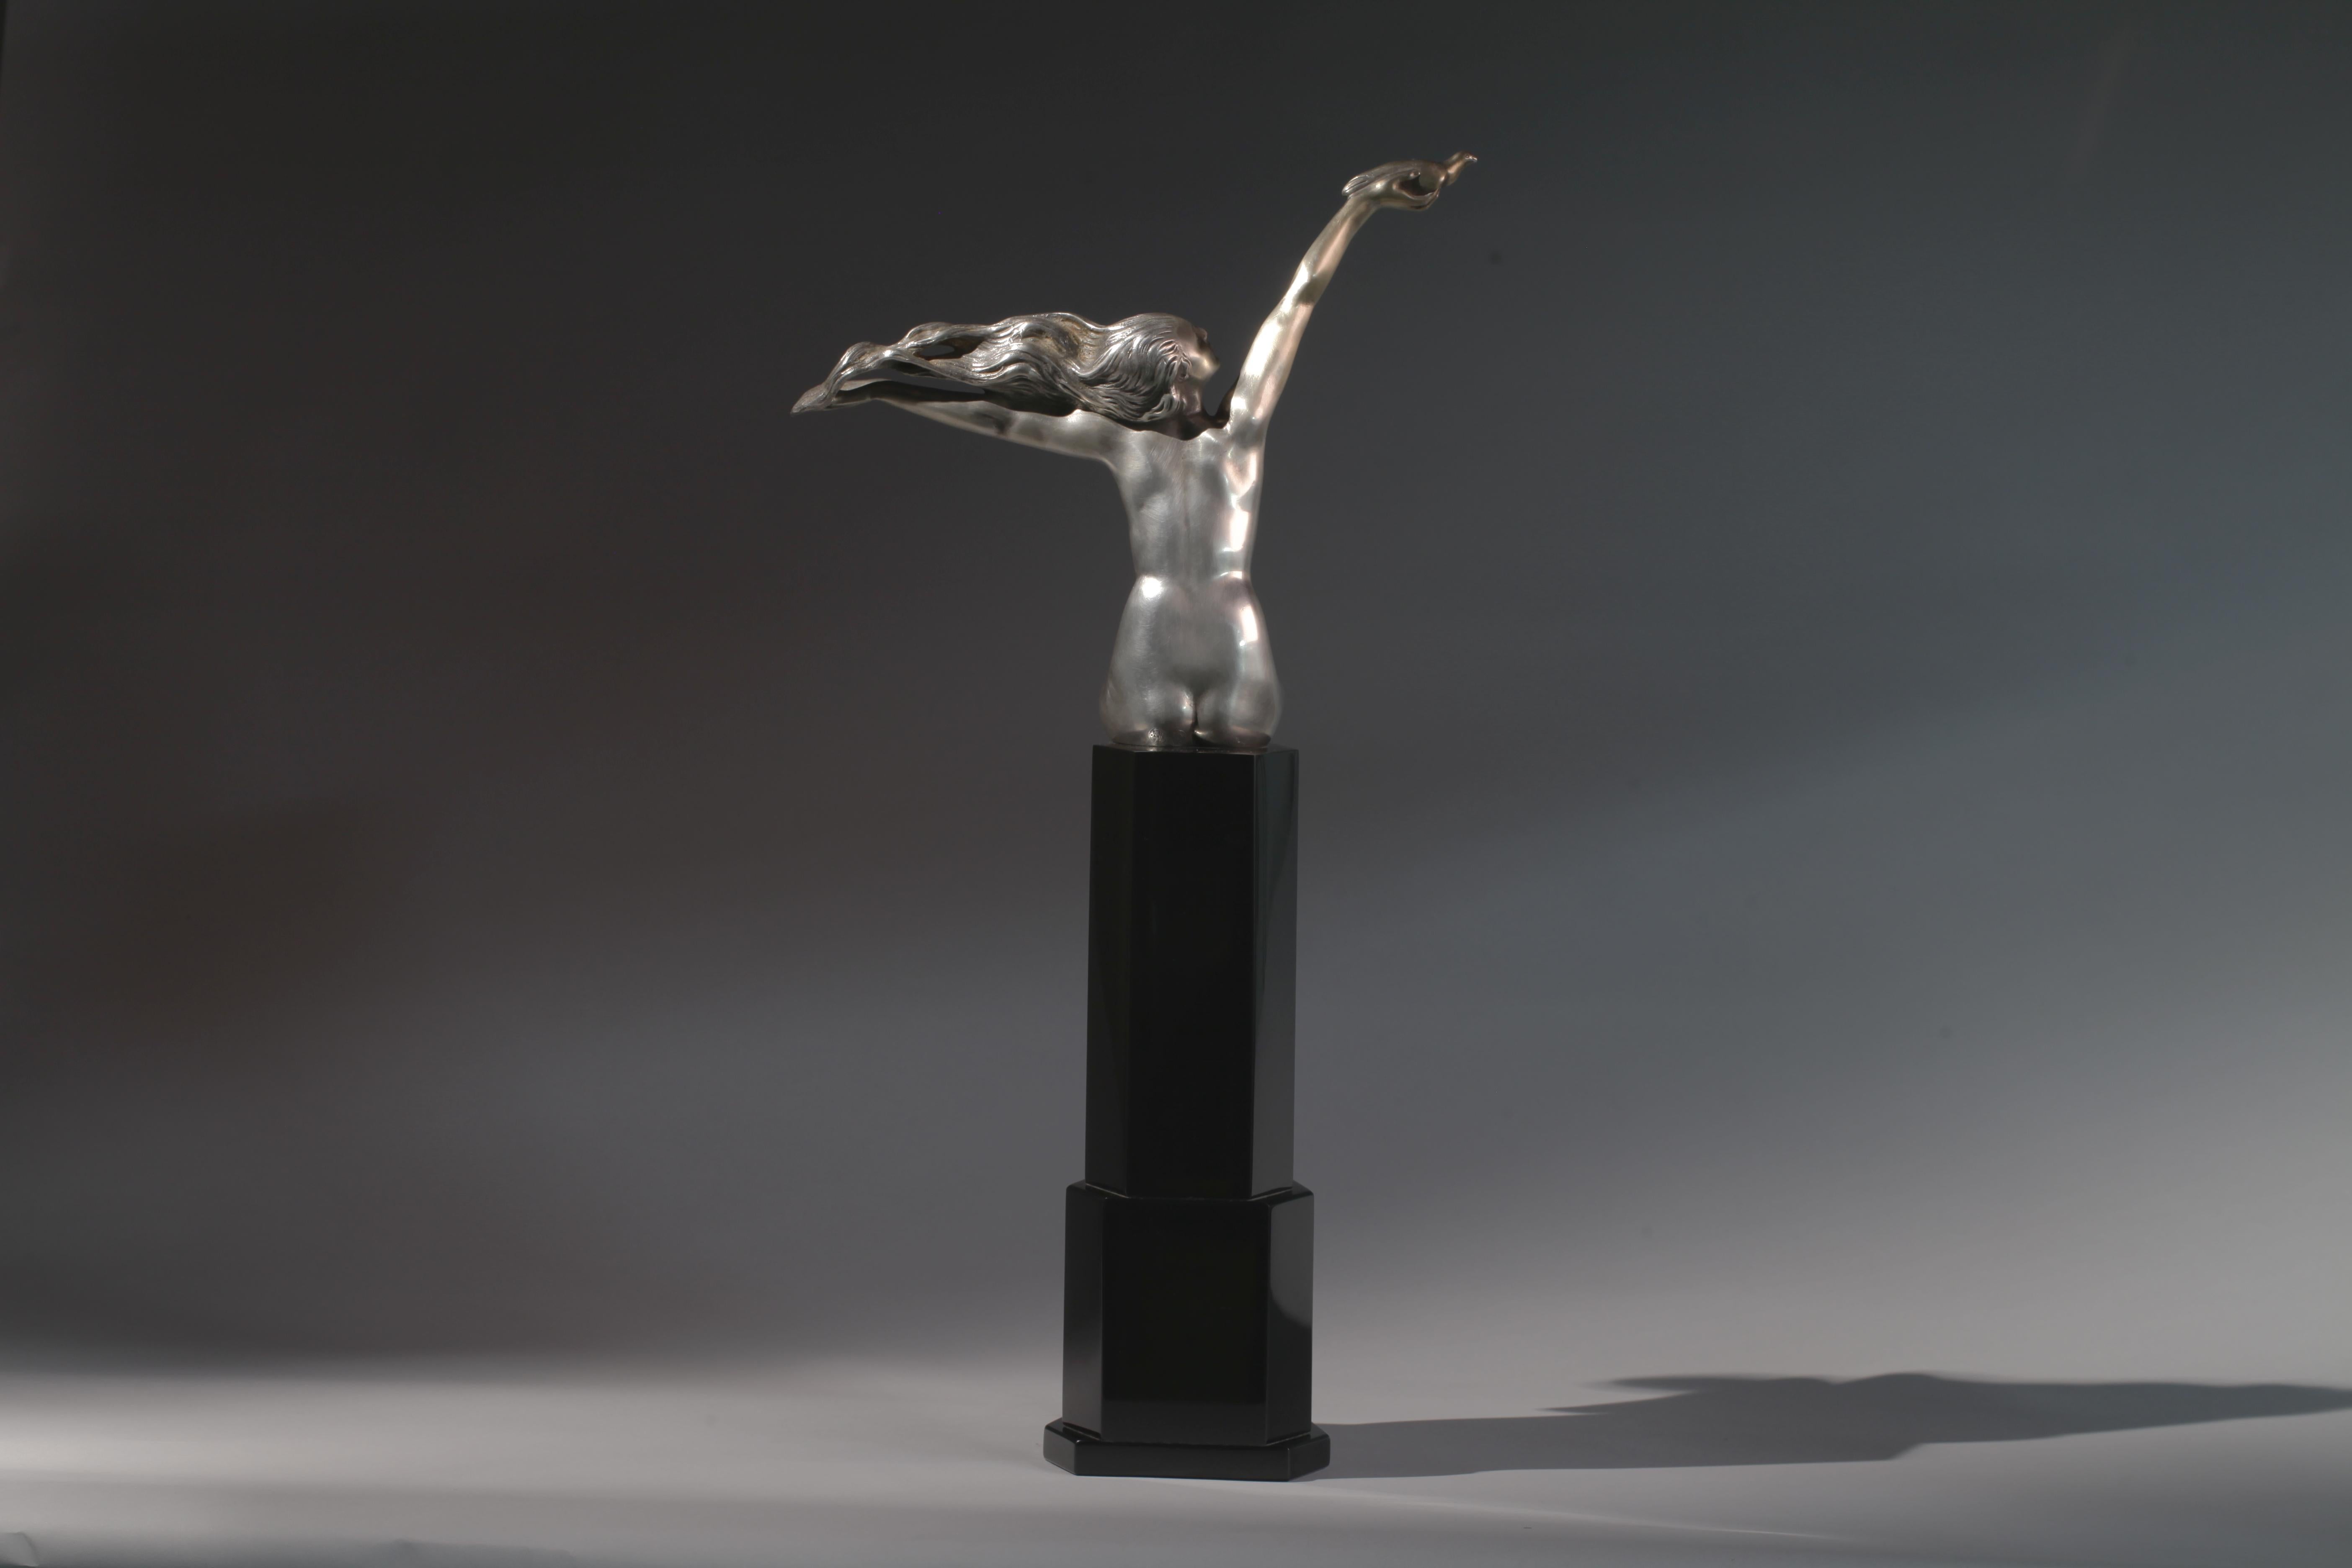 This extremely highly stylized bronze sculpture by the famous Italian artist Amadeo Gennarelli, and titled The Carrier Pigeon, is one of the most important additions to a collection of major Art Deco sculpture one can buy. The superbly cast silvered